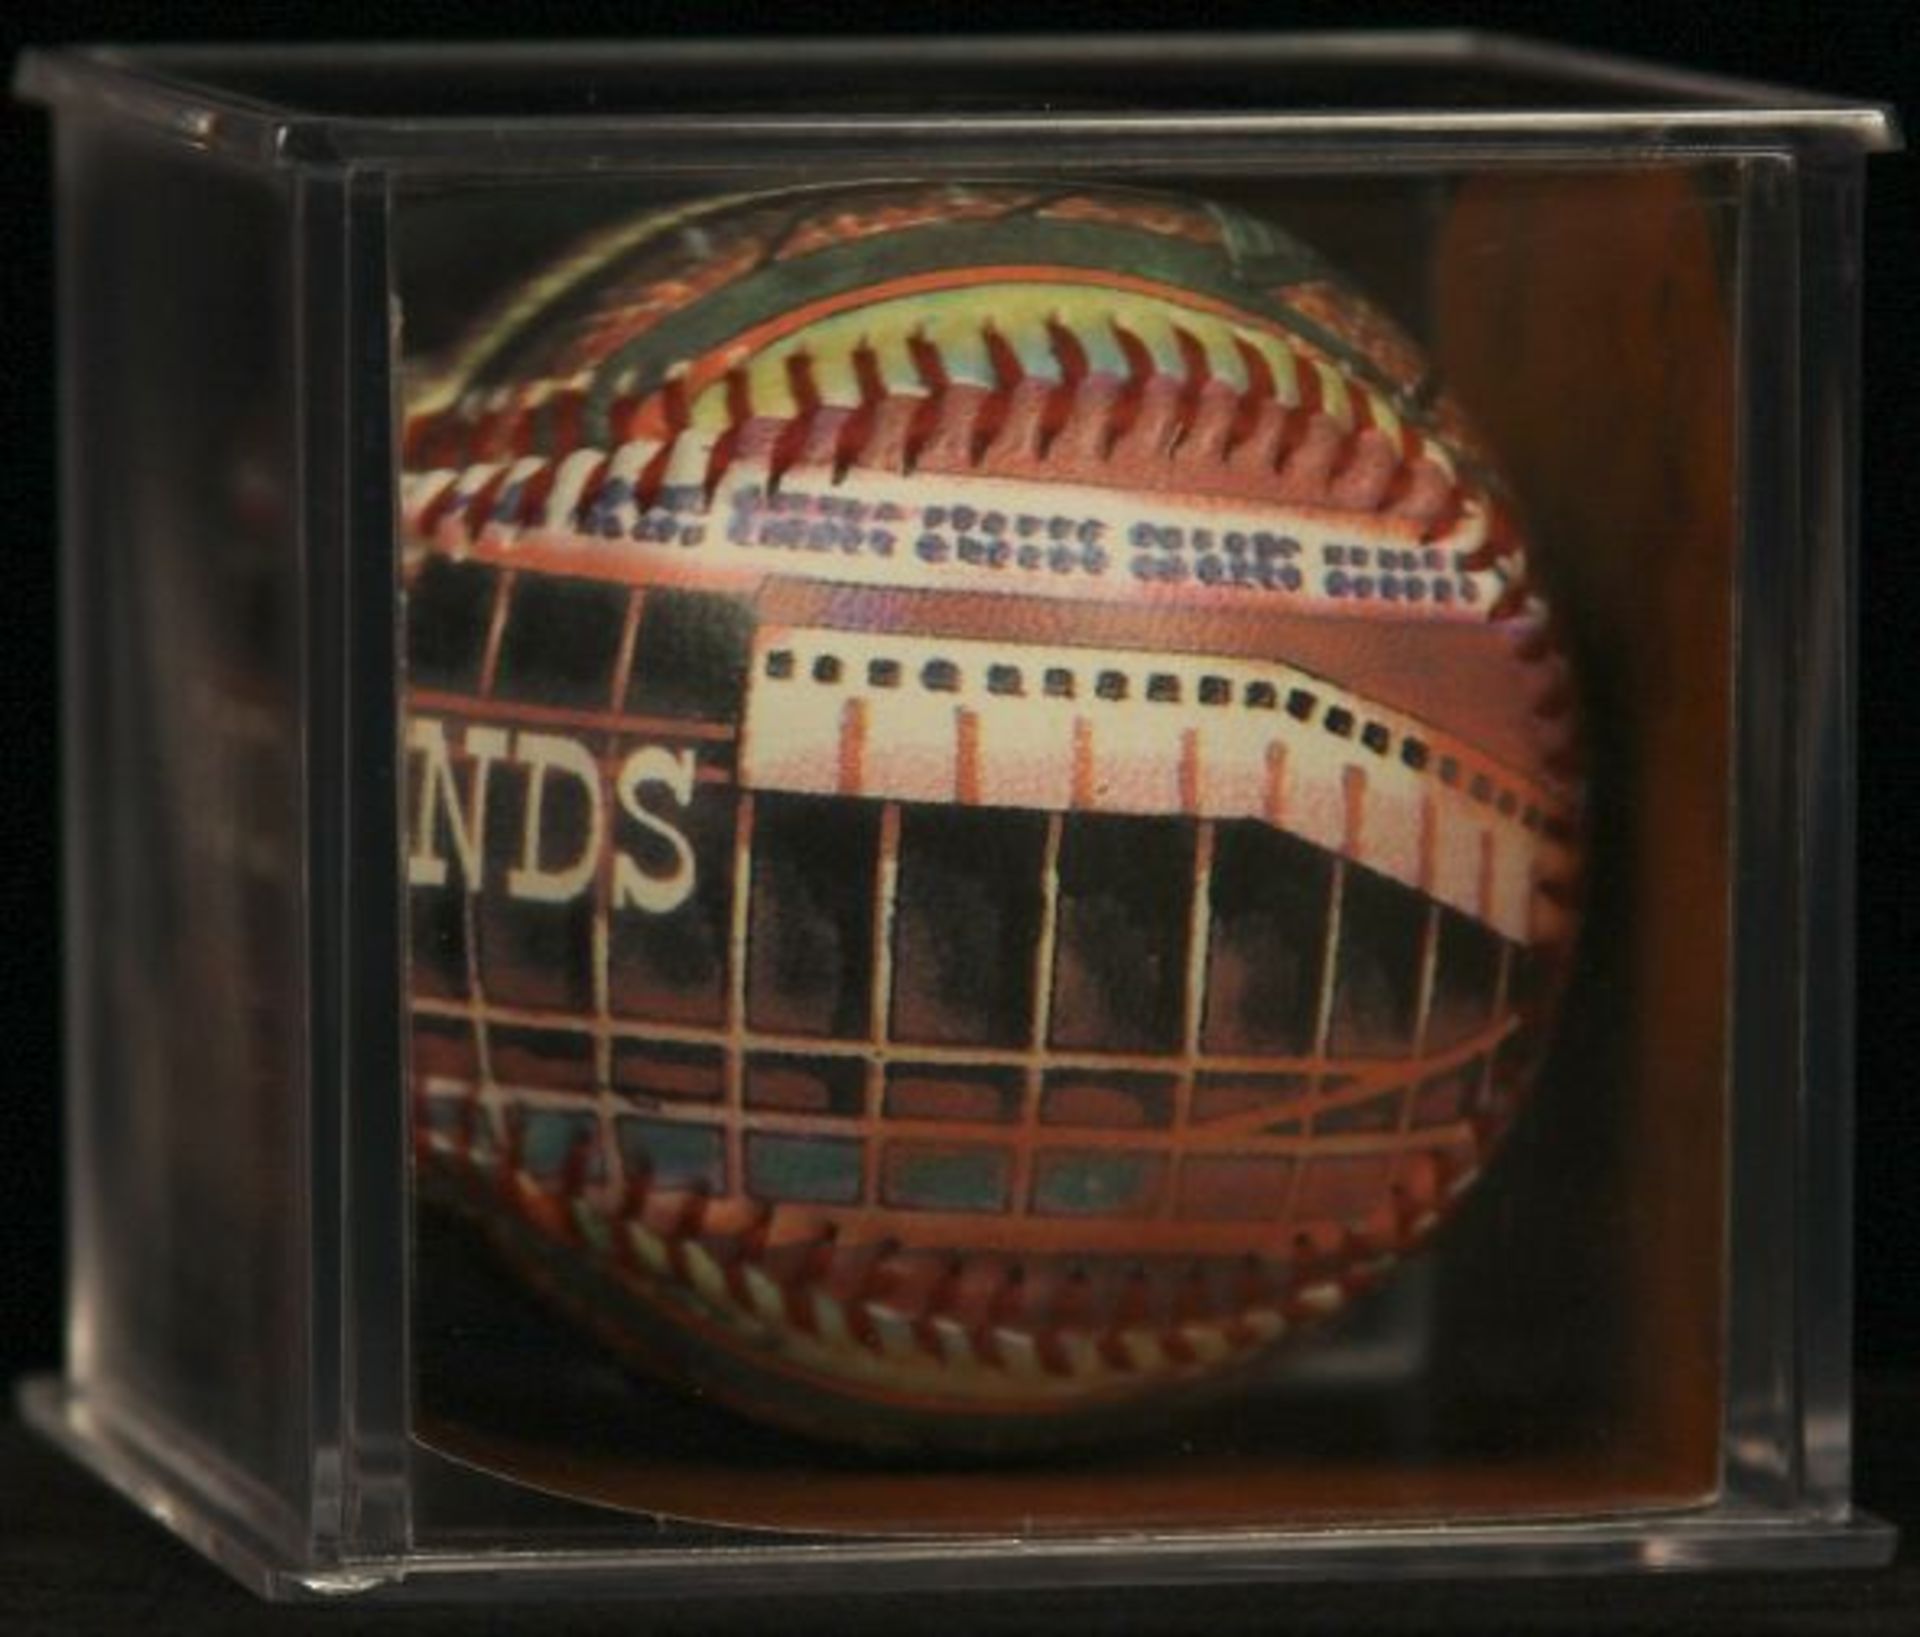 Unforgettaball! "Polo Grounds" Collectable Baseball - Image 3 of 4